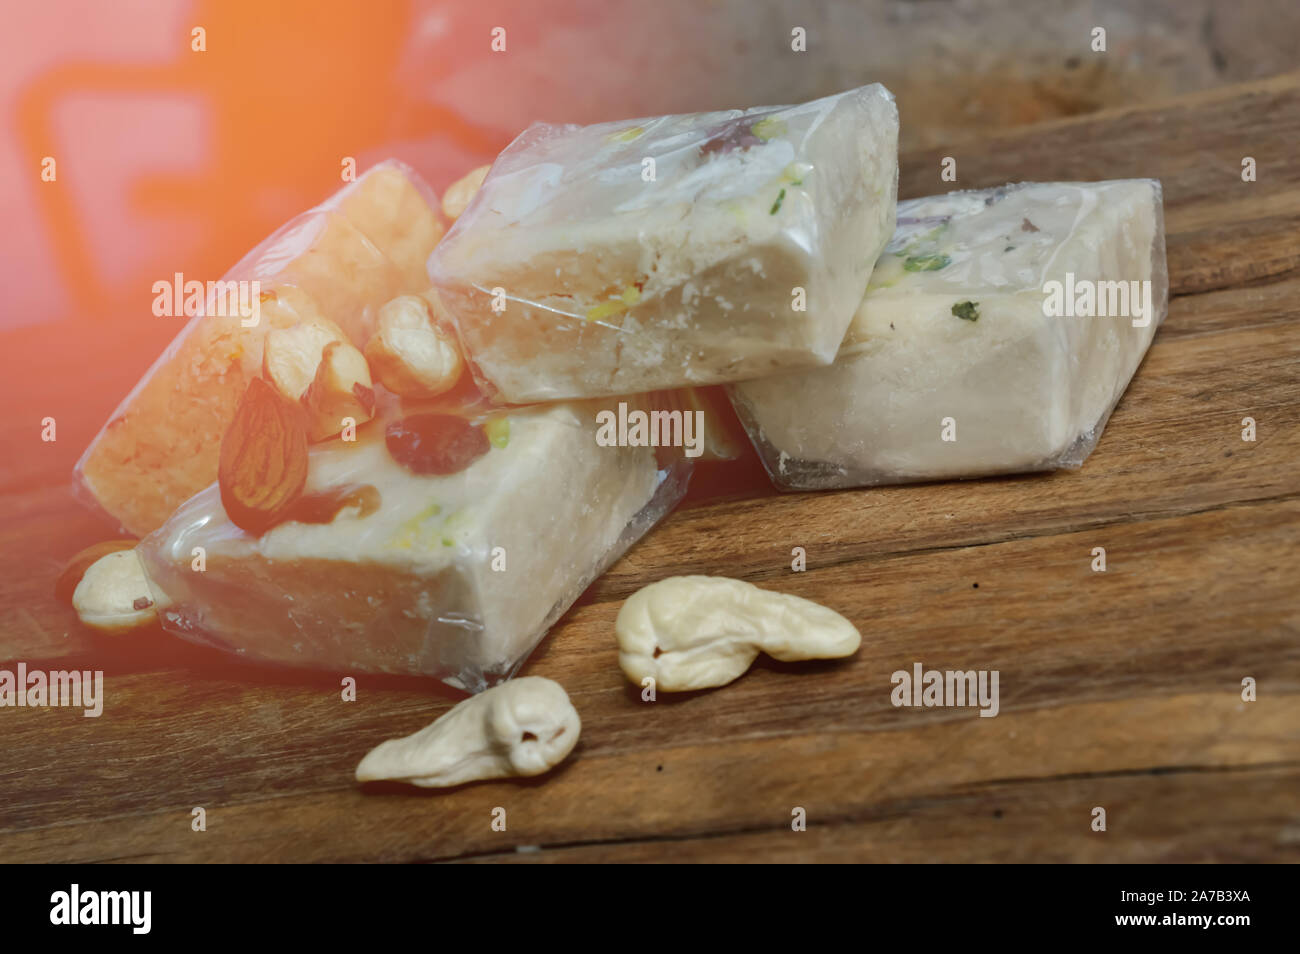 soanpapdi top view,sonpapdi and nuts on wooden table Stock Photo